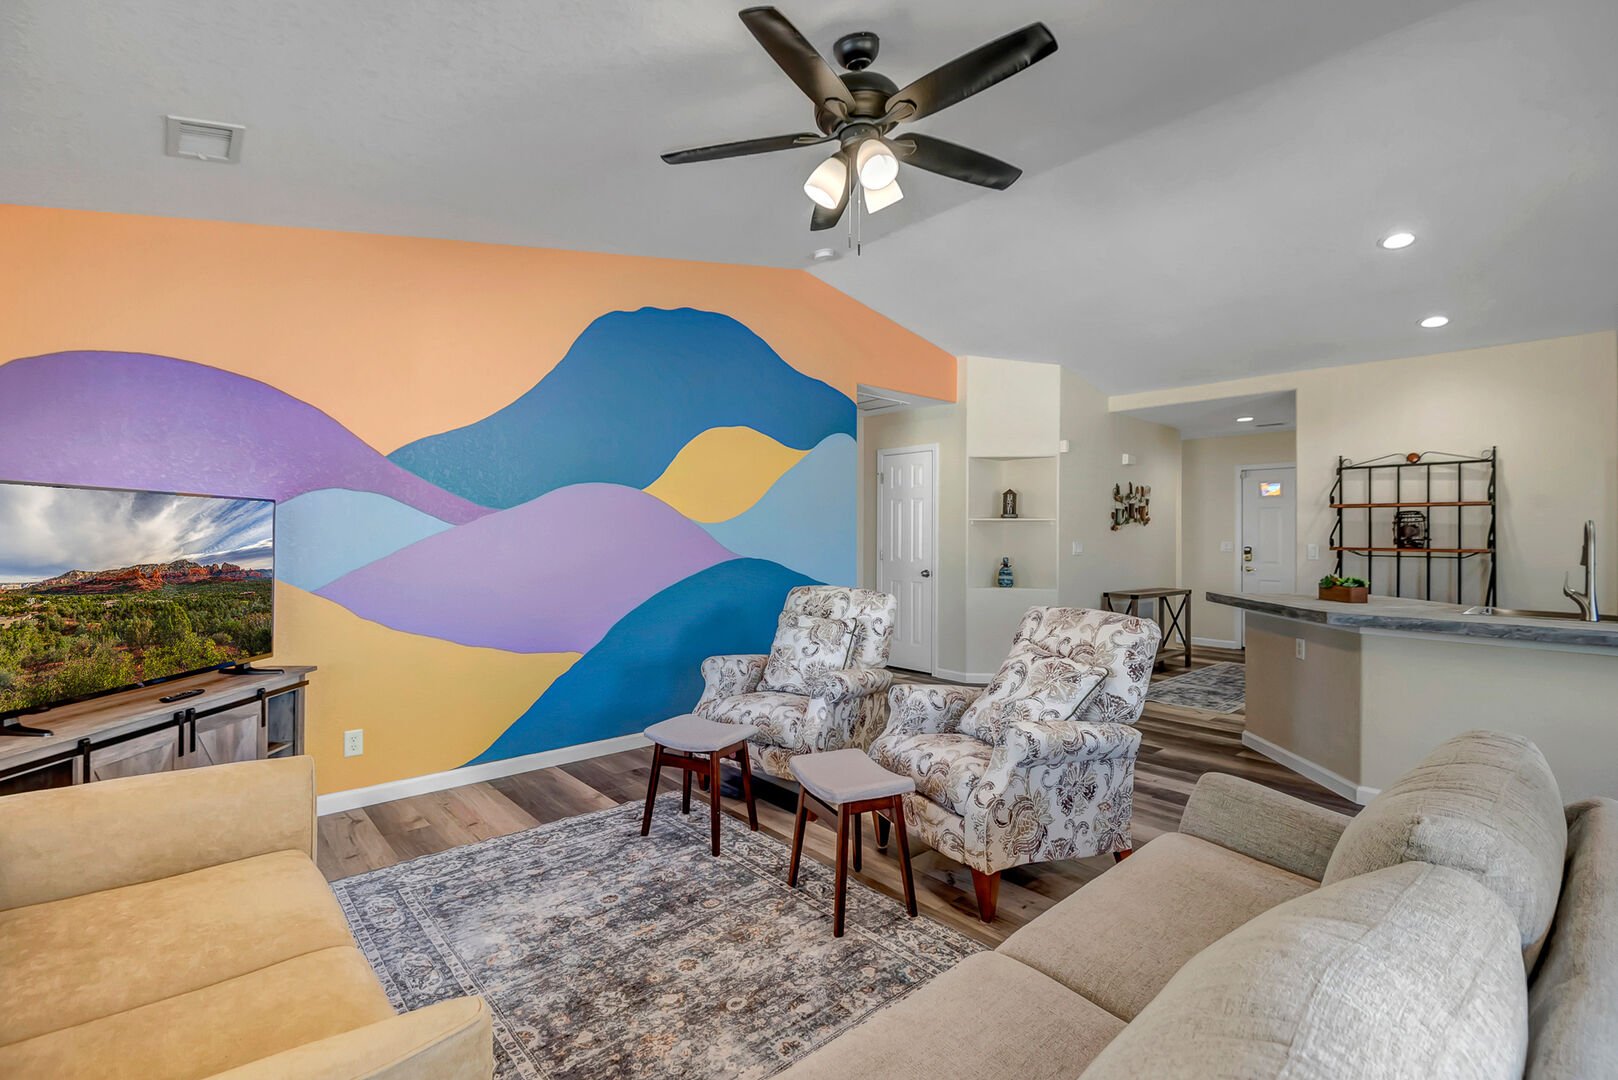 Living Room offers a vibrant accent wall, you'll find cozy seating arrangements and a 50” Smart TV